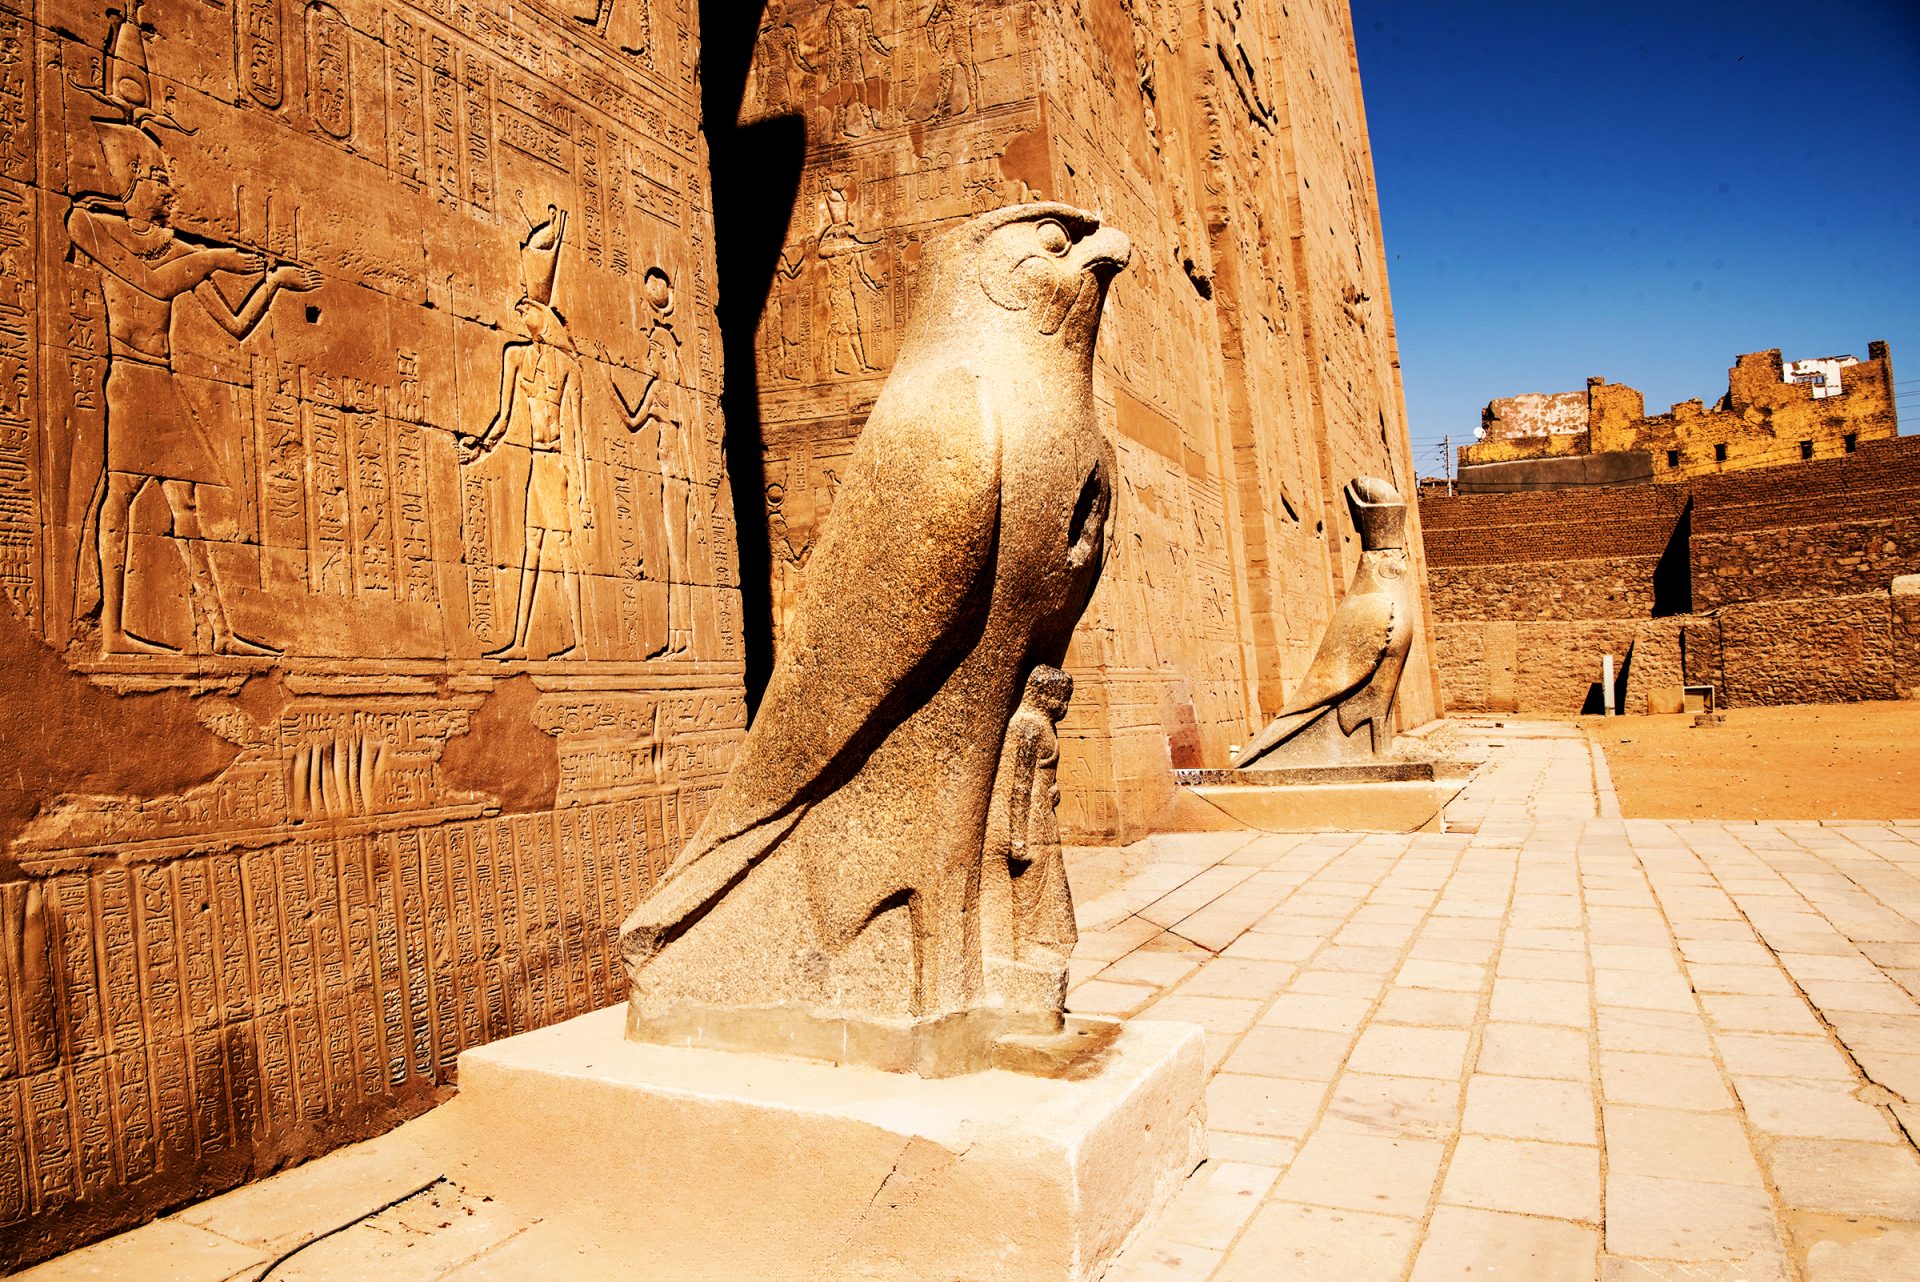 The image shows two stone statues of falcons outside an ancient Egyptian temple. The statues are located on either side of a doorway with hieroglyphics carved into the walls. The falcons are depicted with their wings folded. The statues are weathered. The background consists of a clear blue sky and the ruins of a temple or palace in the distance. The ground is made of sandstone and is covered in sand. The falcons are symbols of Horus, the god of the sky, kingship, and protection.